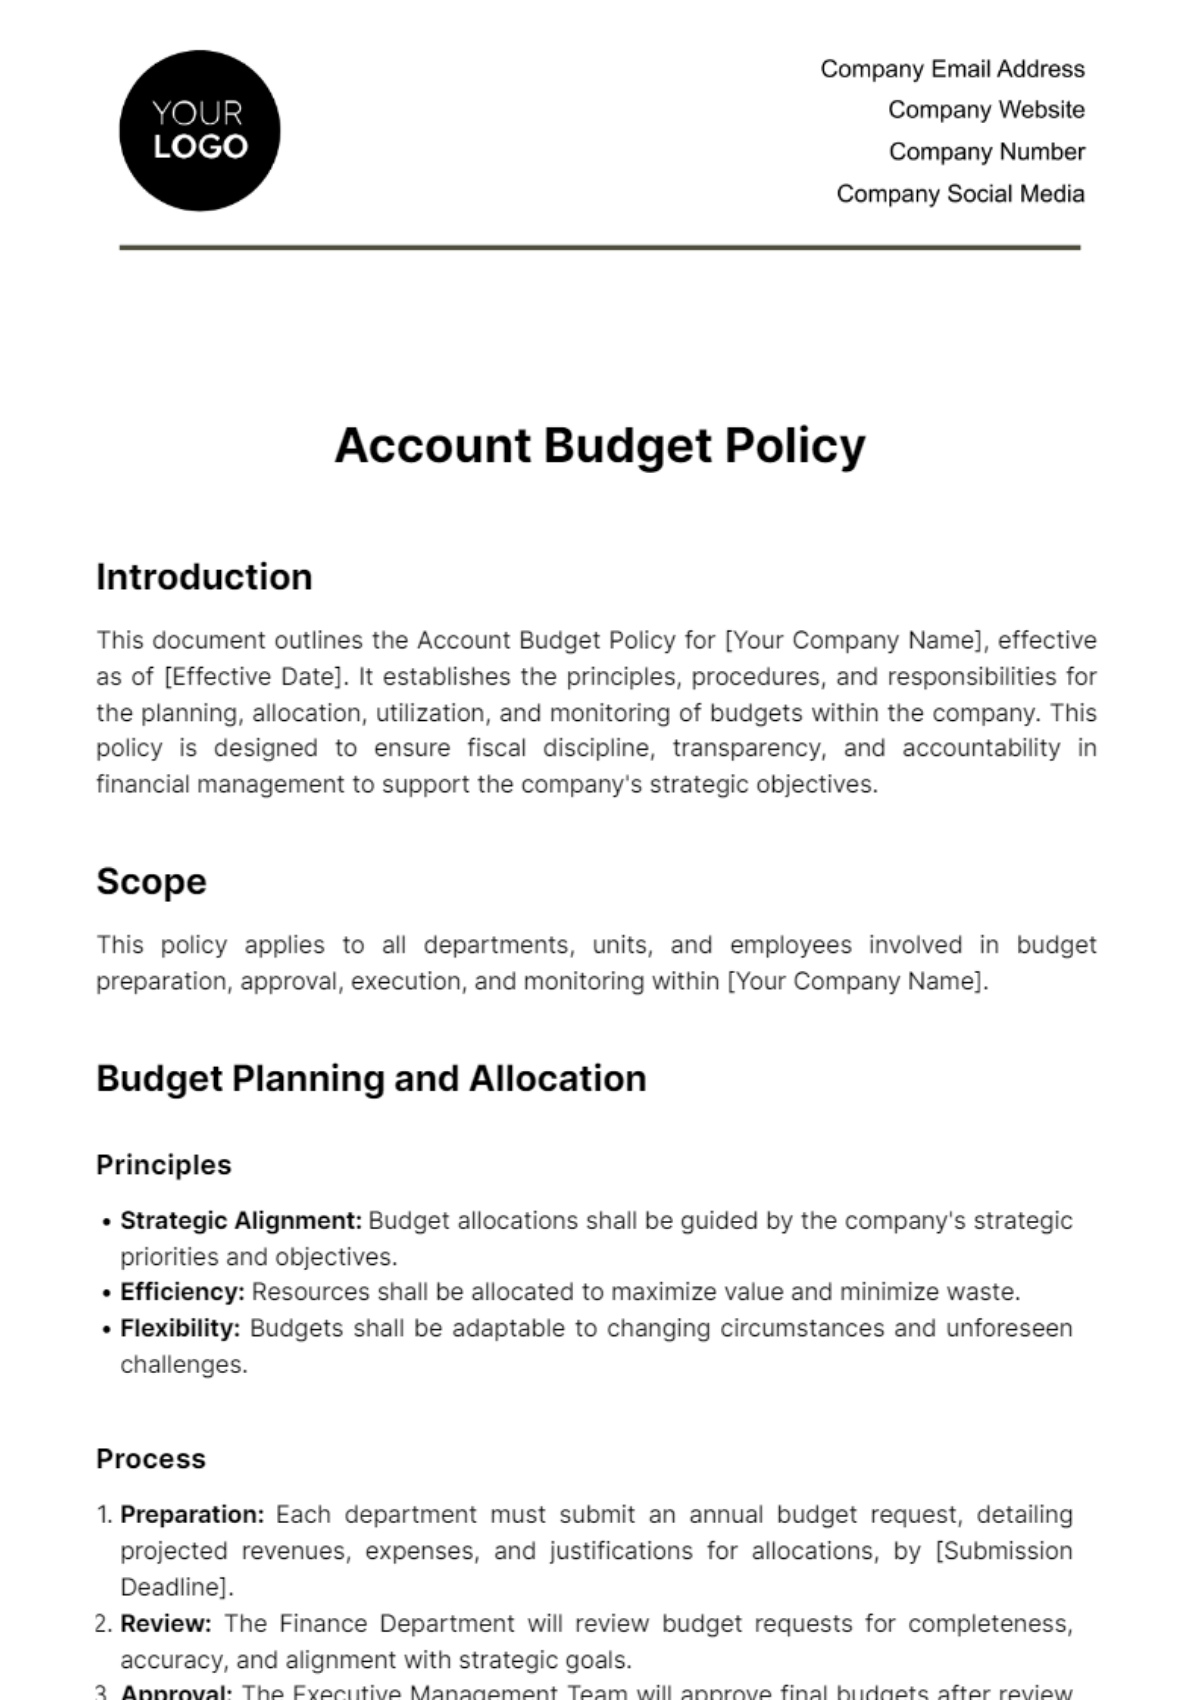 Account Budget Policy Template